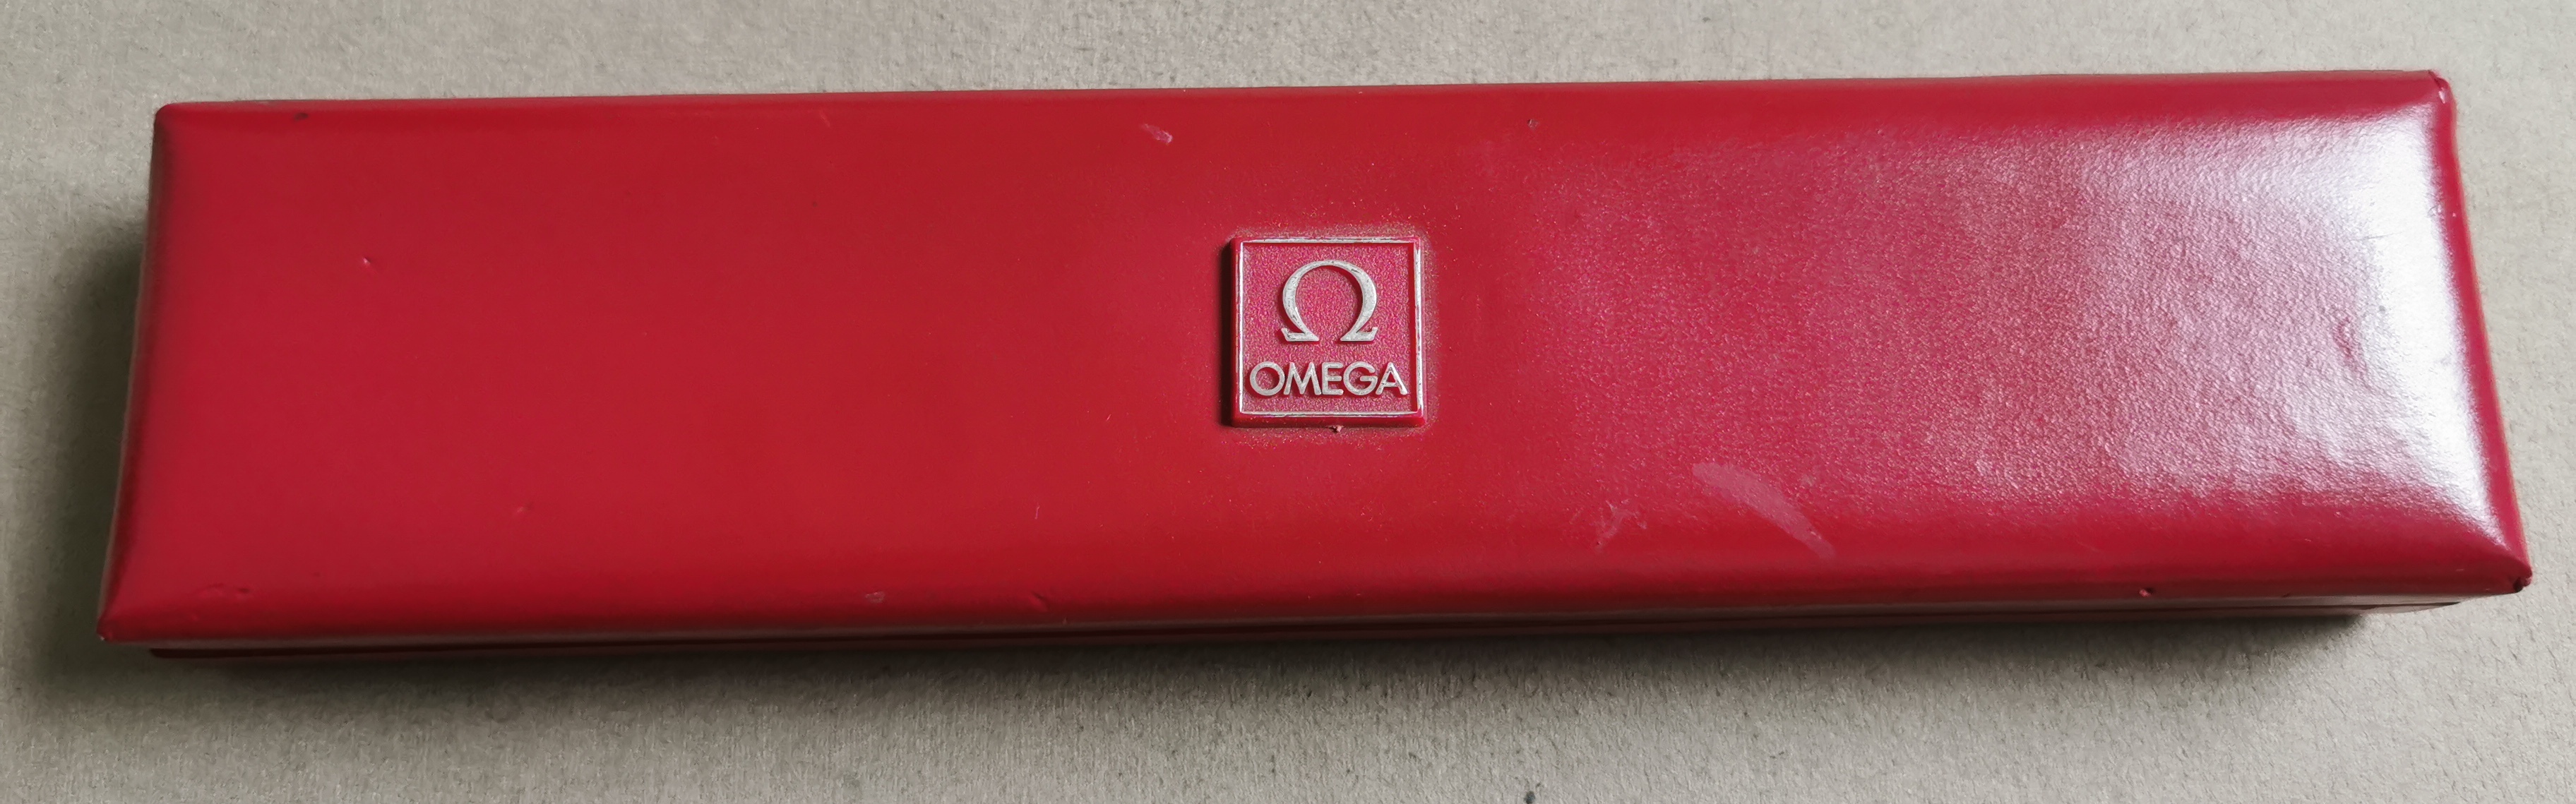 Omega vintage watch box leather red big logo no outer box for men models good condition | San Giorgio a Cremano